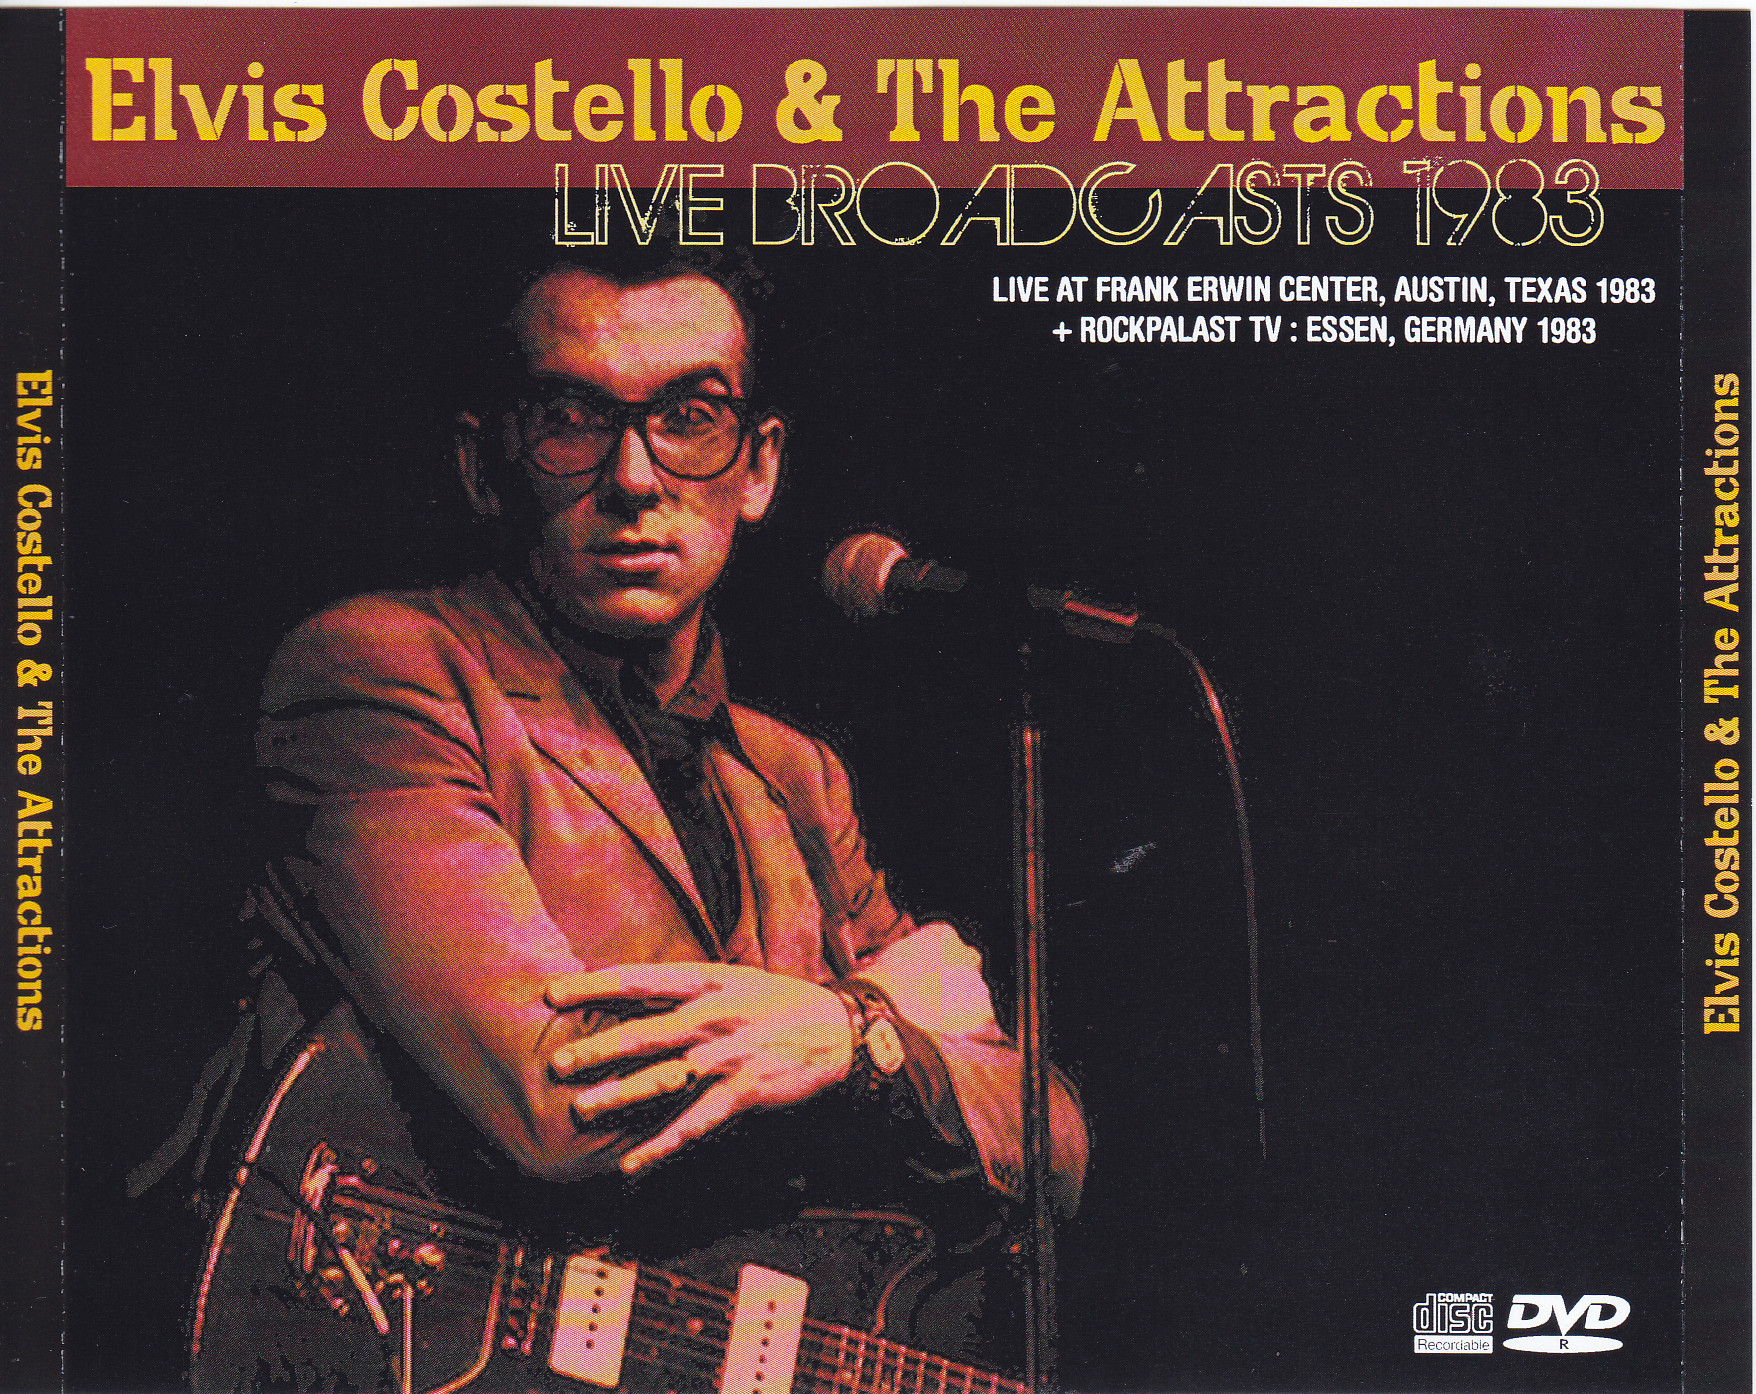 Elvis Costello u0026 The Attractions / Live Broadcasts 1983 / 2CDR+1DVDR –  GiGinJapan